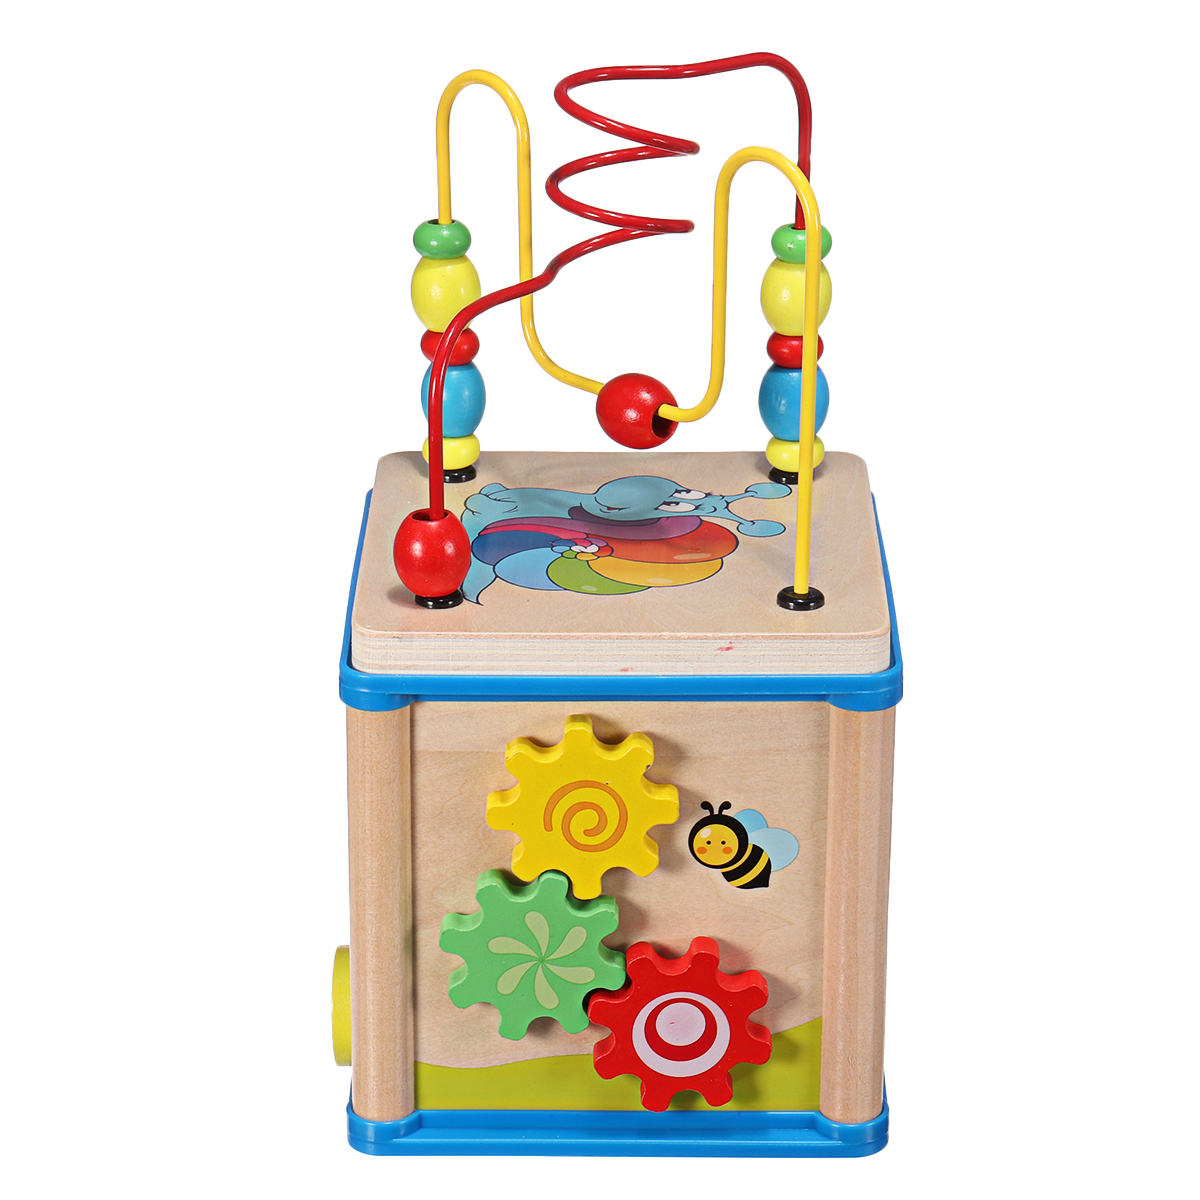 Wooden-Multi-functional-Wisdom-Aroind-Treasure-Box-with-Beads-Parent-child-Educational-Learning-Toy--1733559-3